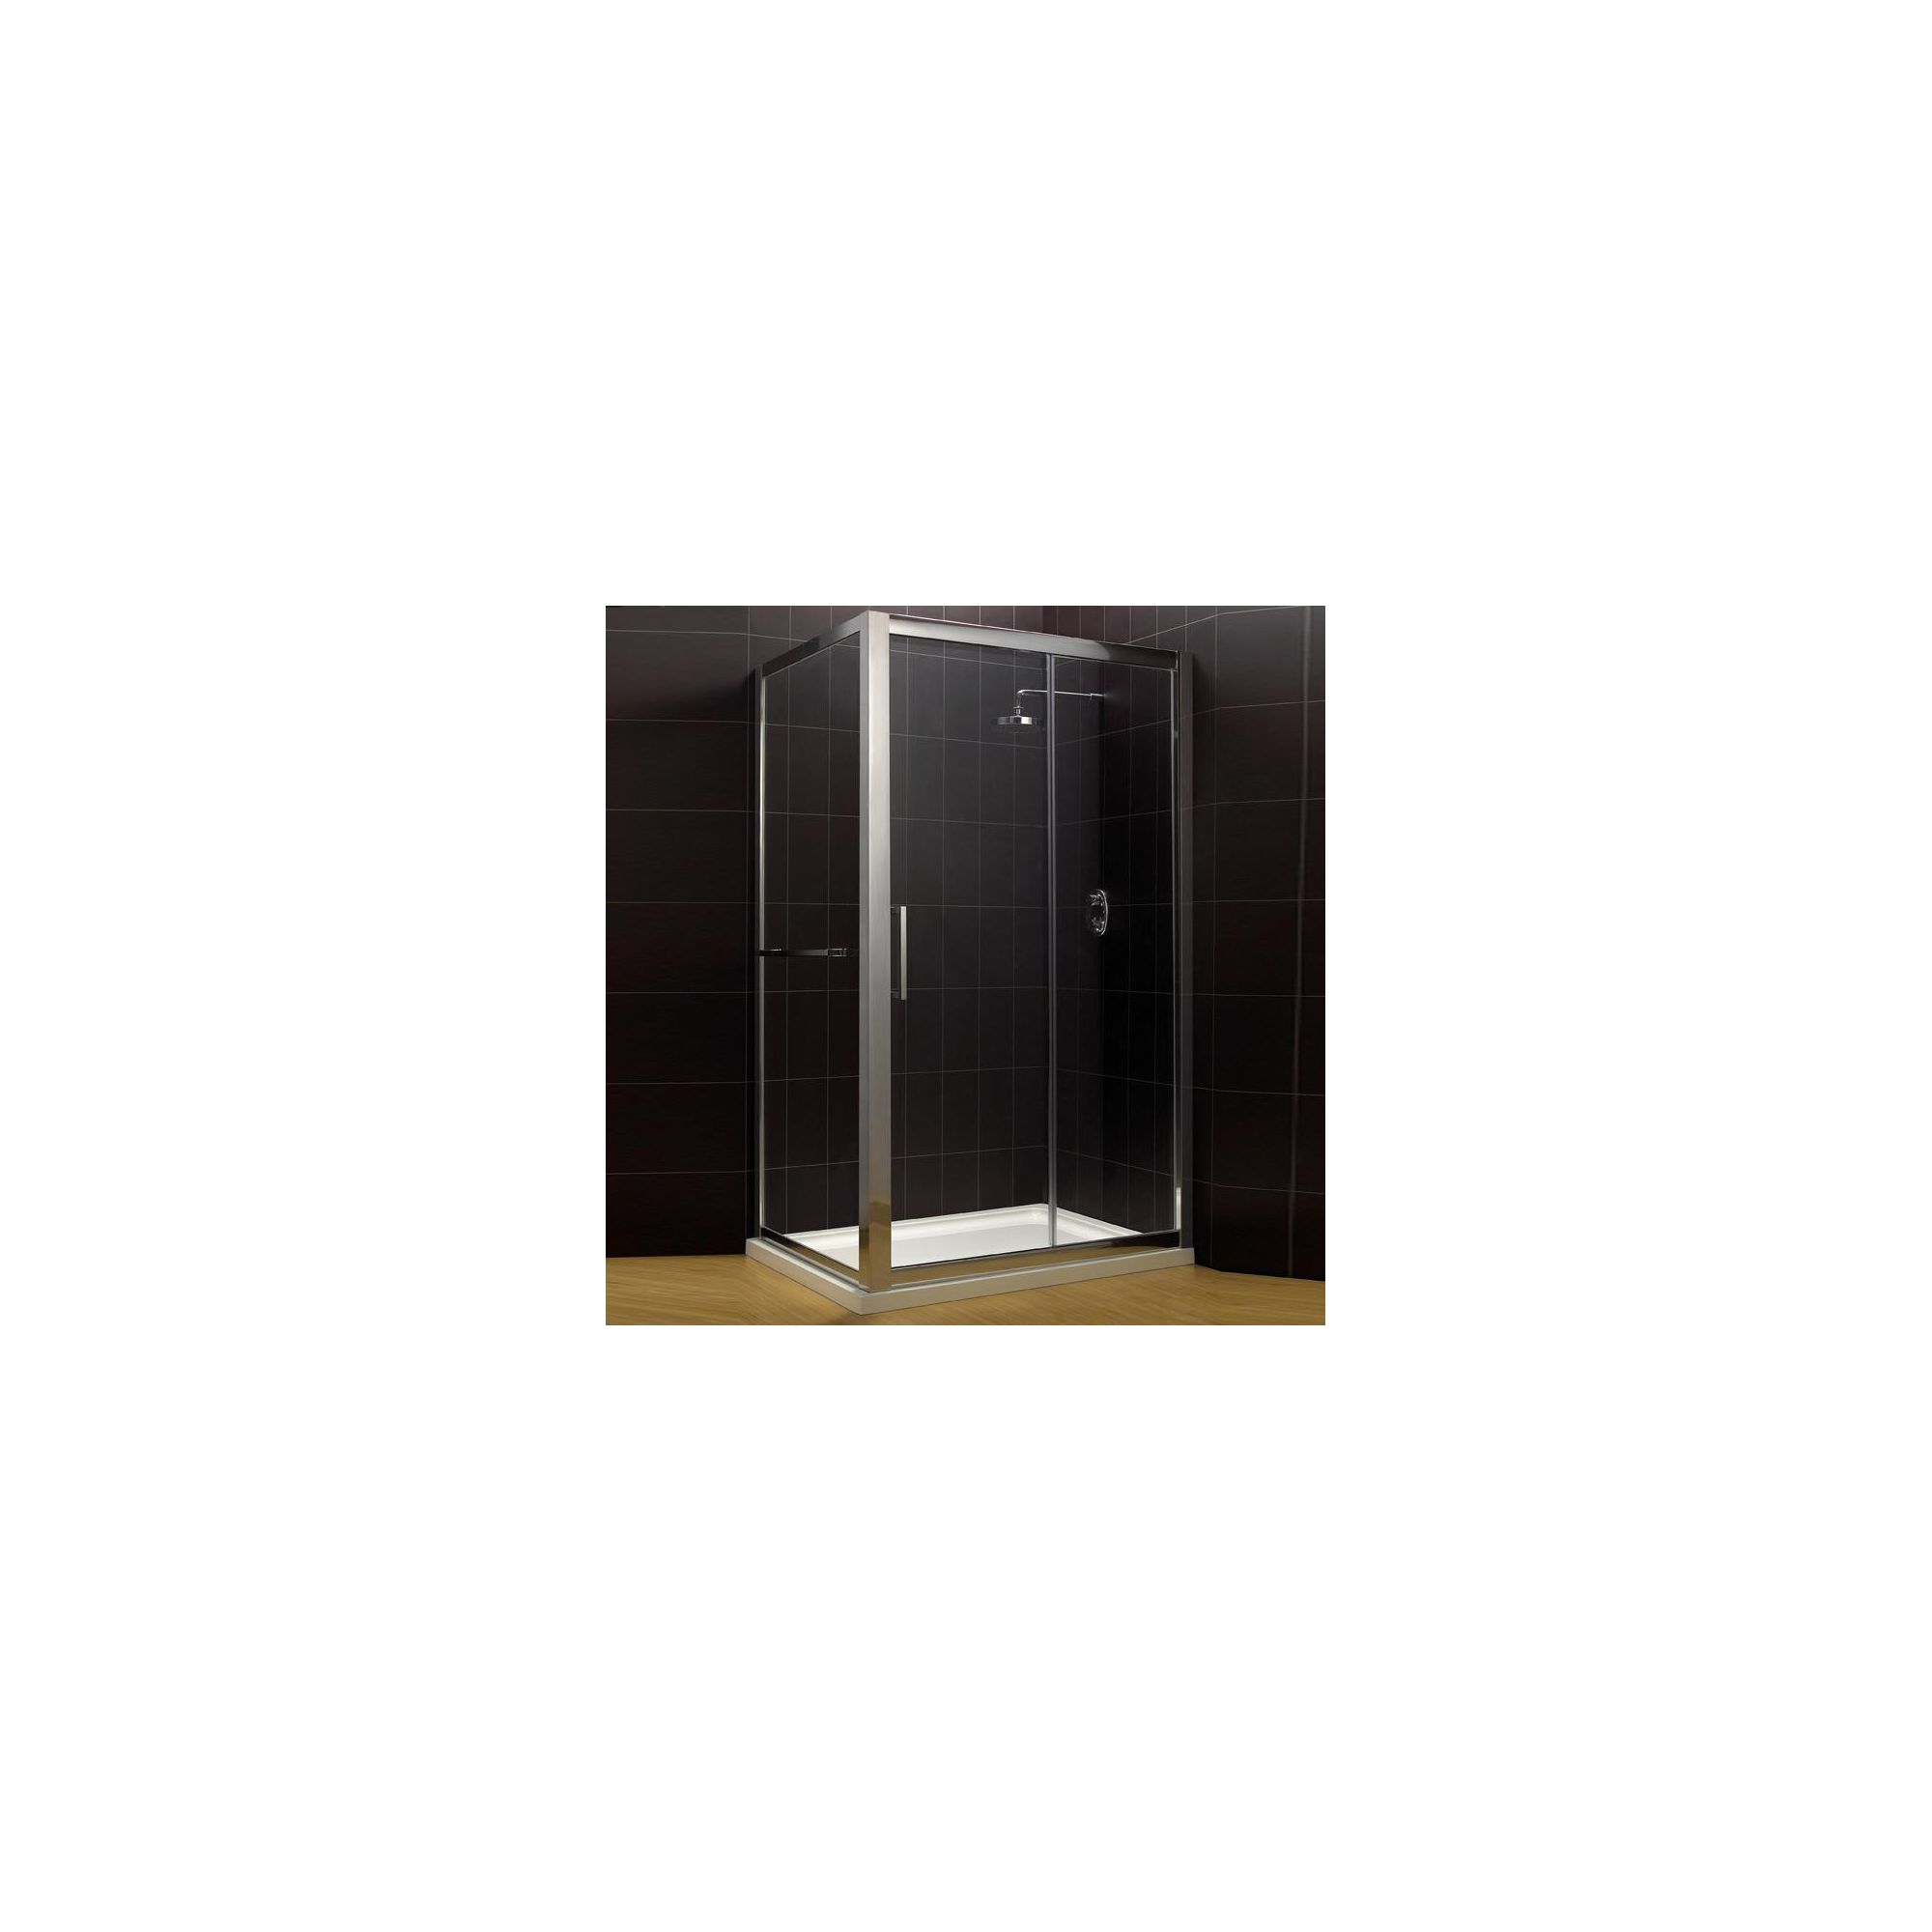 Duchy Supreme Silver Sliding Door Shower Enclosure, 1200mm x 800mm, Standard Tray, 8mm Glass at Tesco Direct